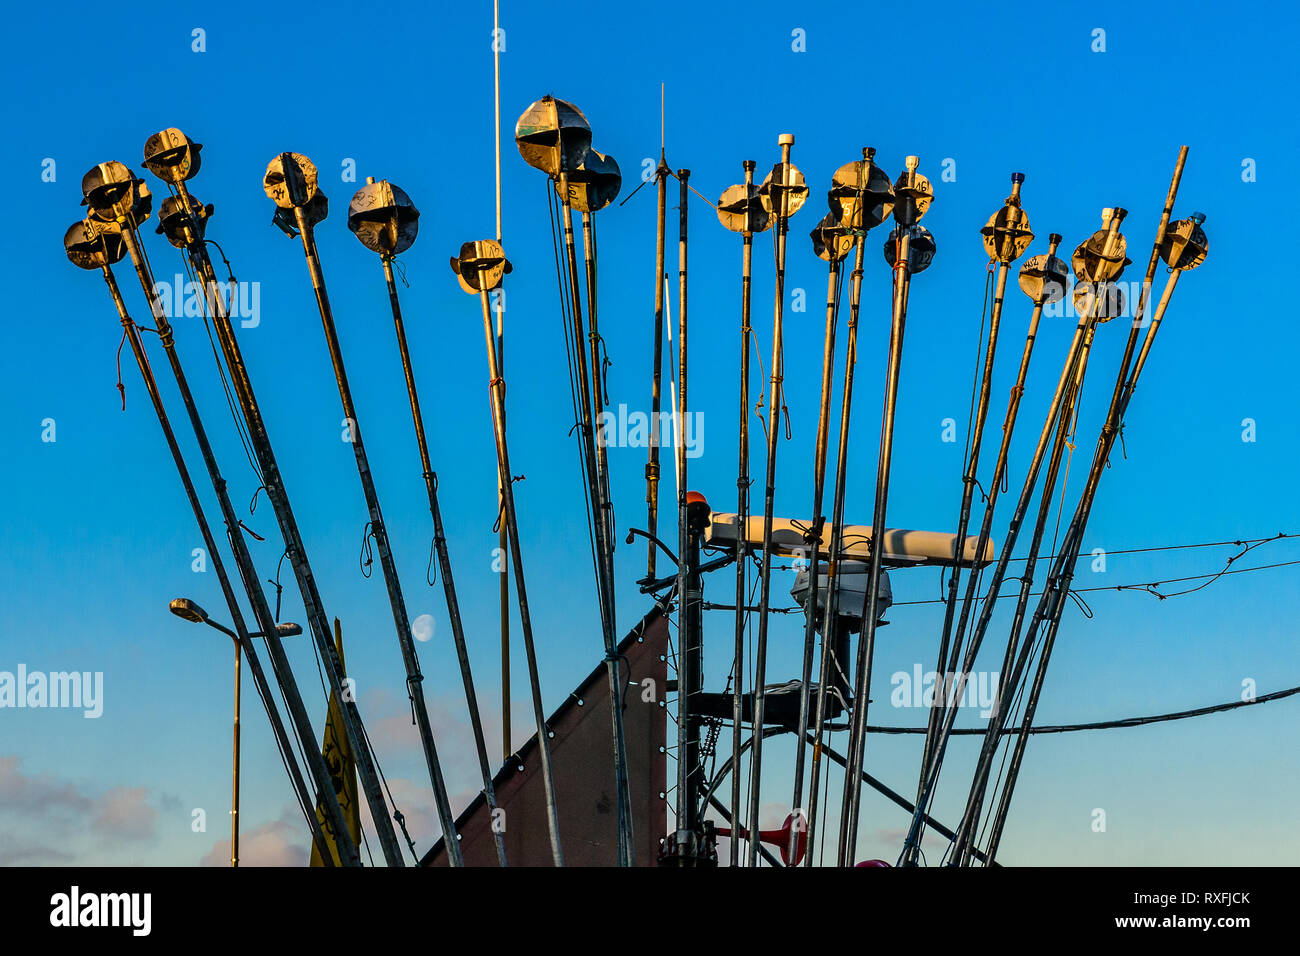 Hel penisula (Poland) in winter time. Fisherman tools. Stock Photo